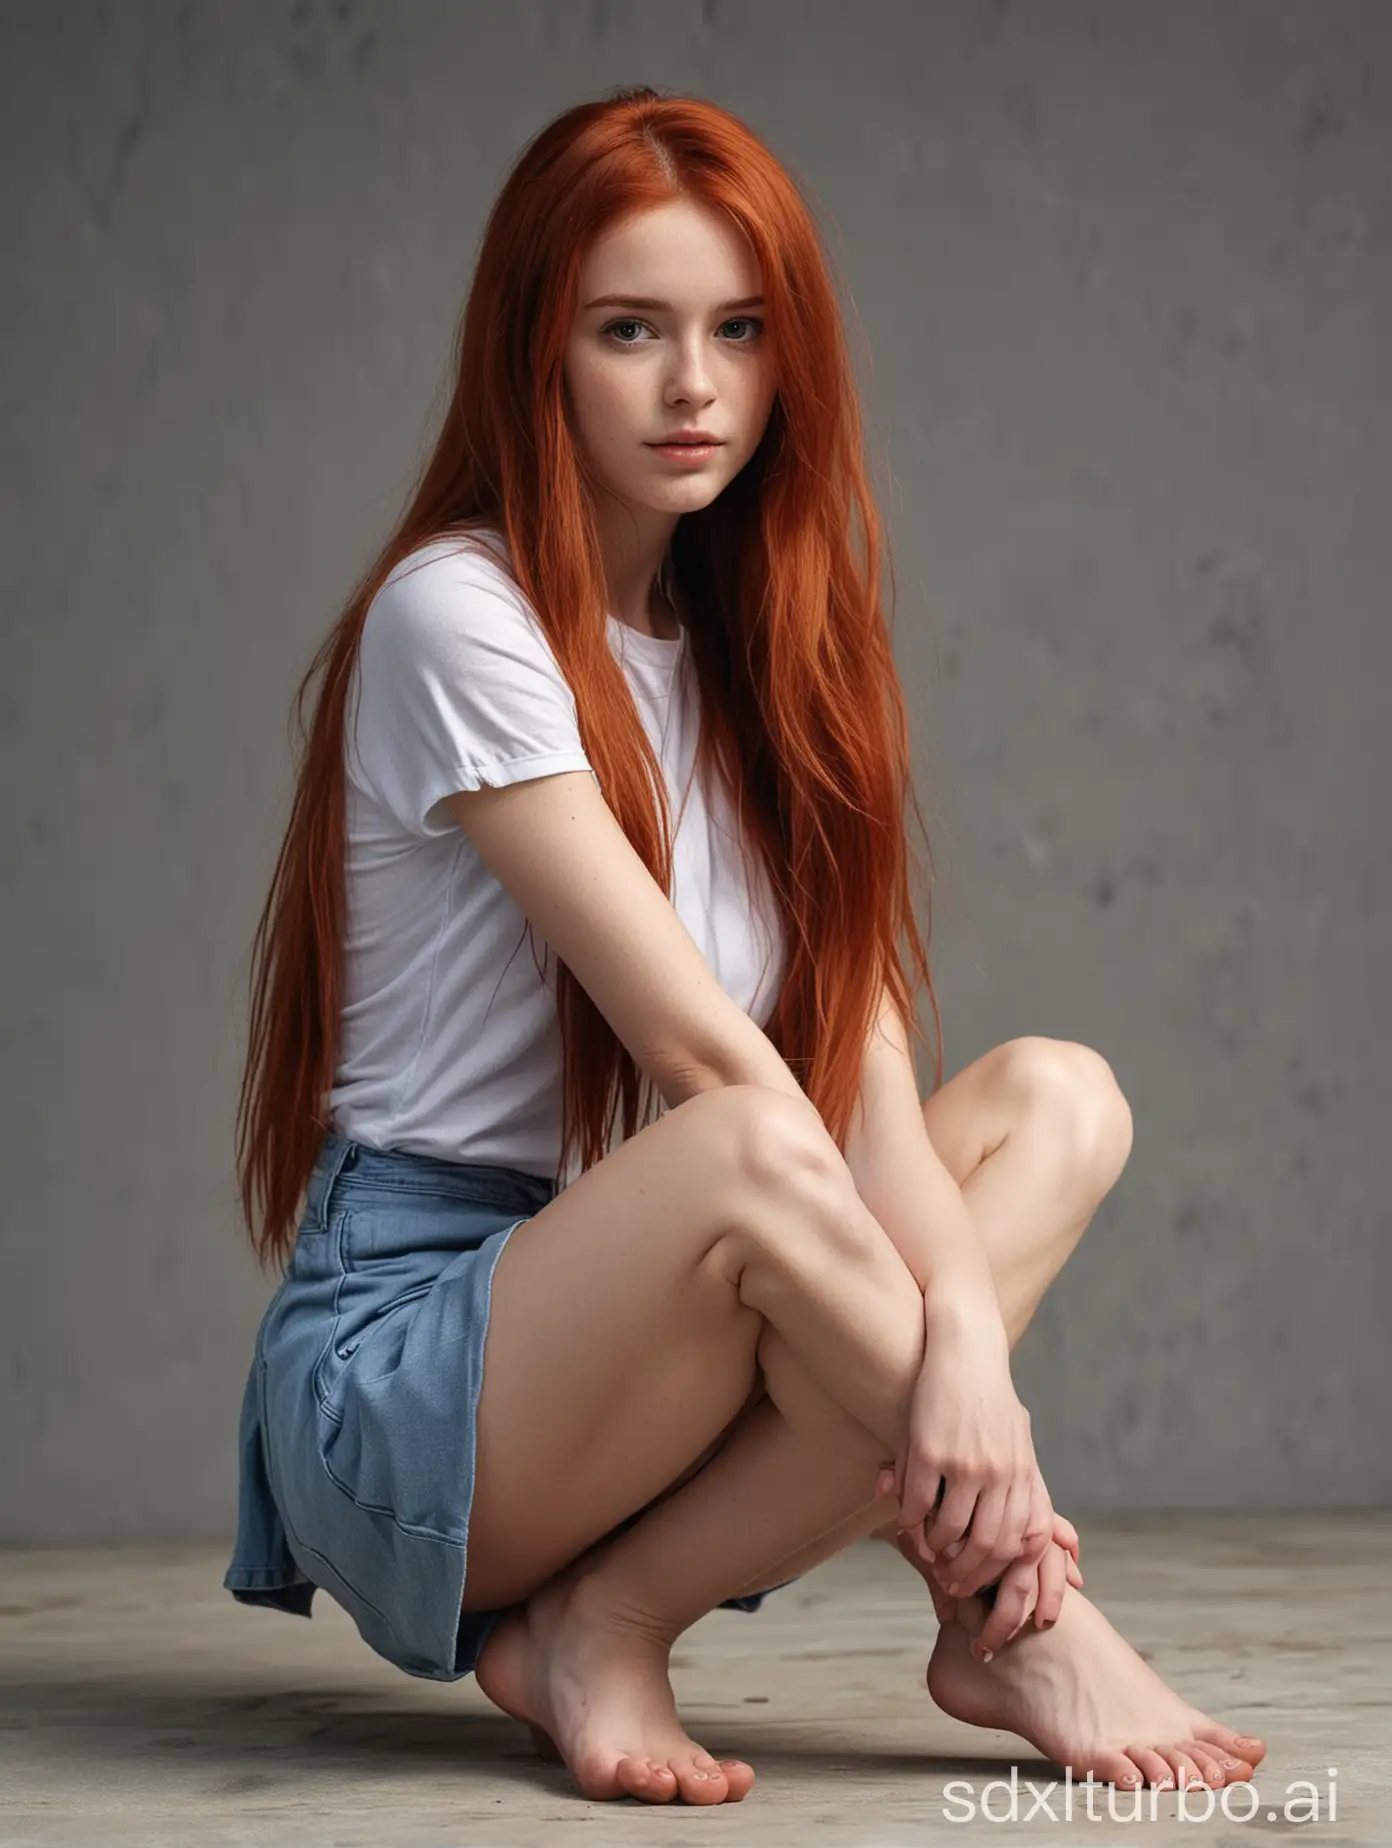 RedHaired-Girl-Kneeling-High-Resolution-Image